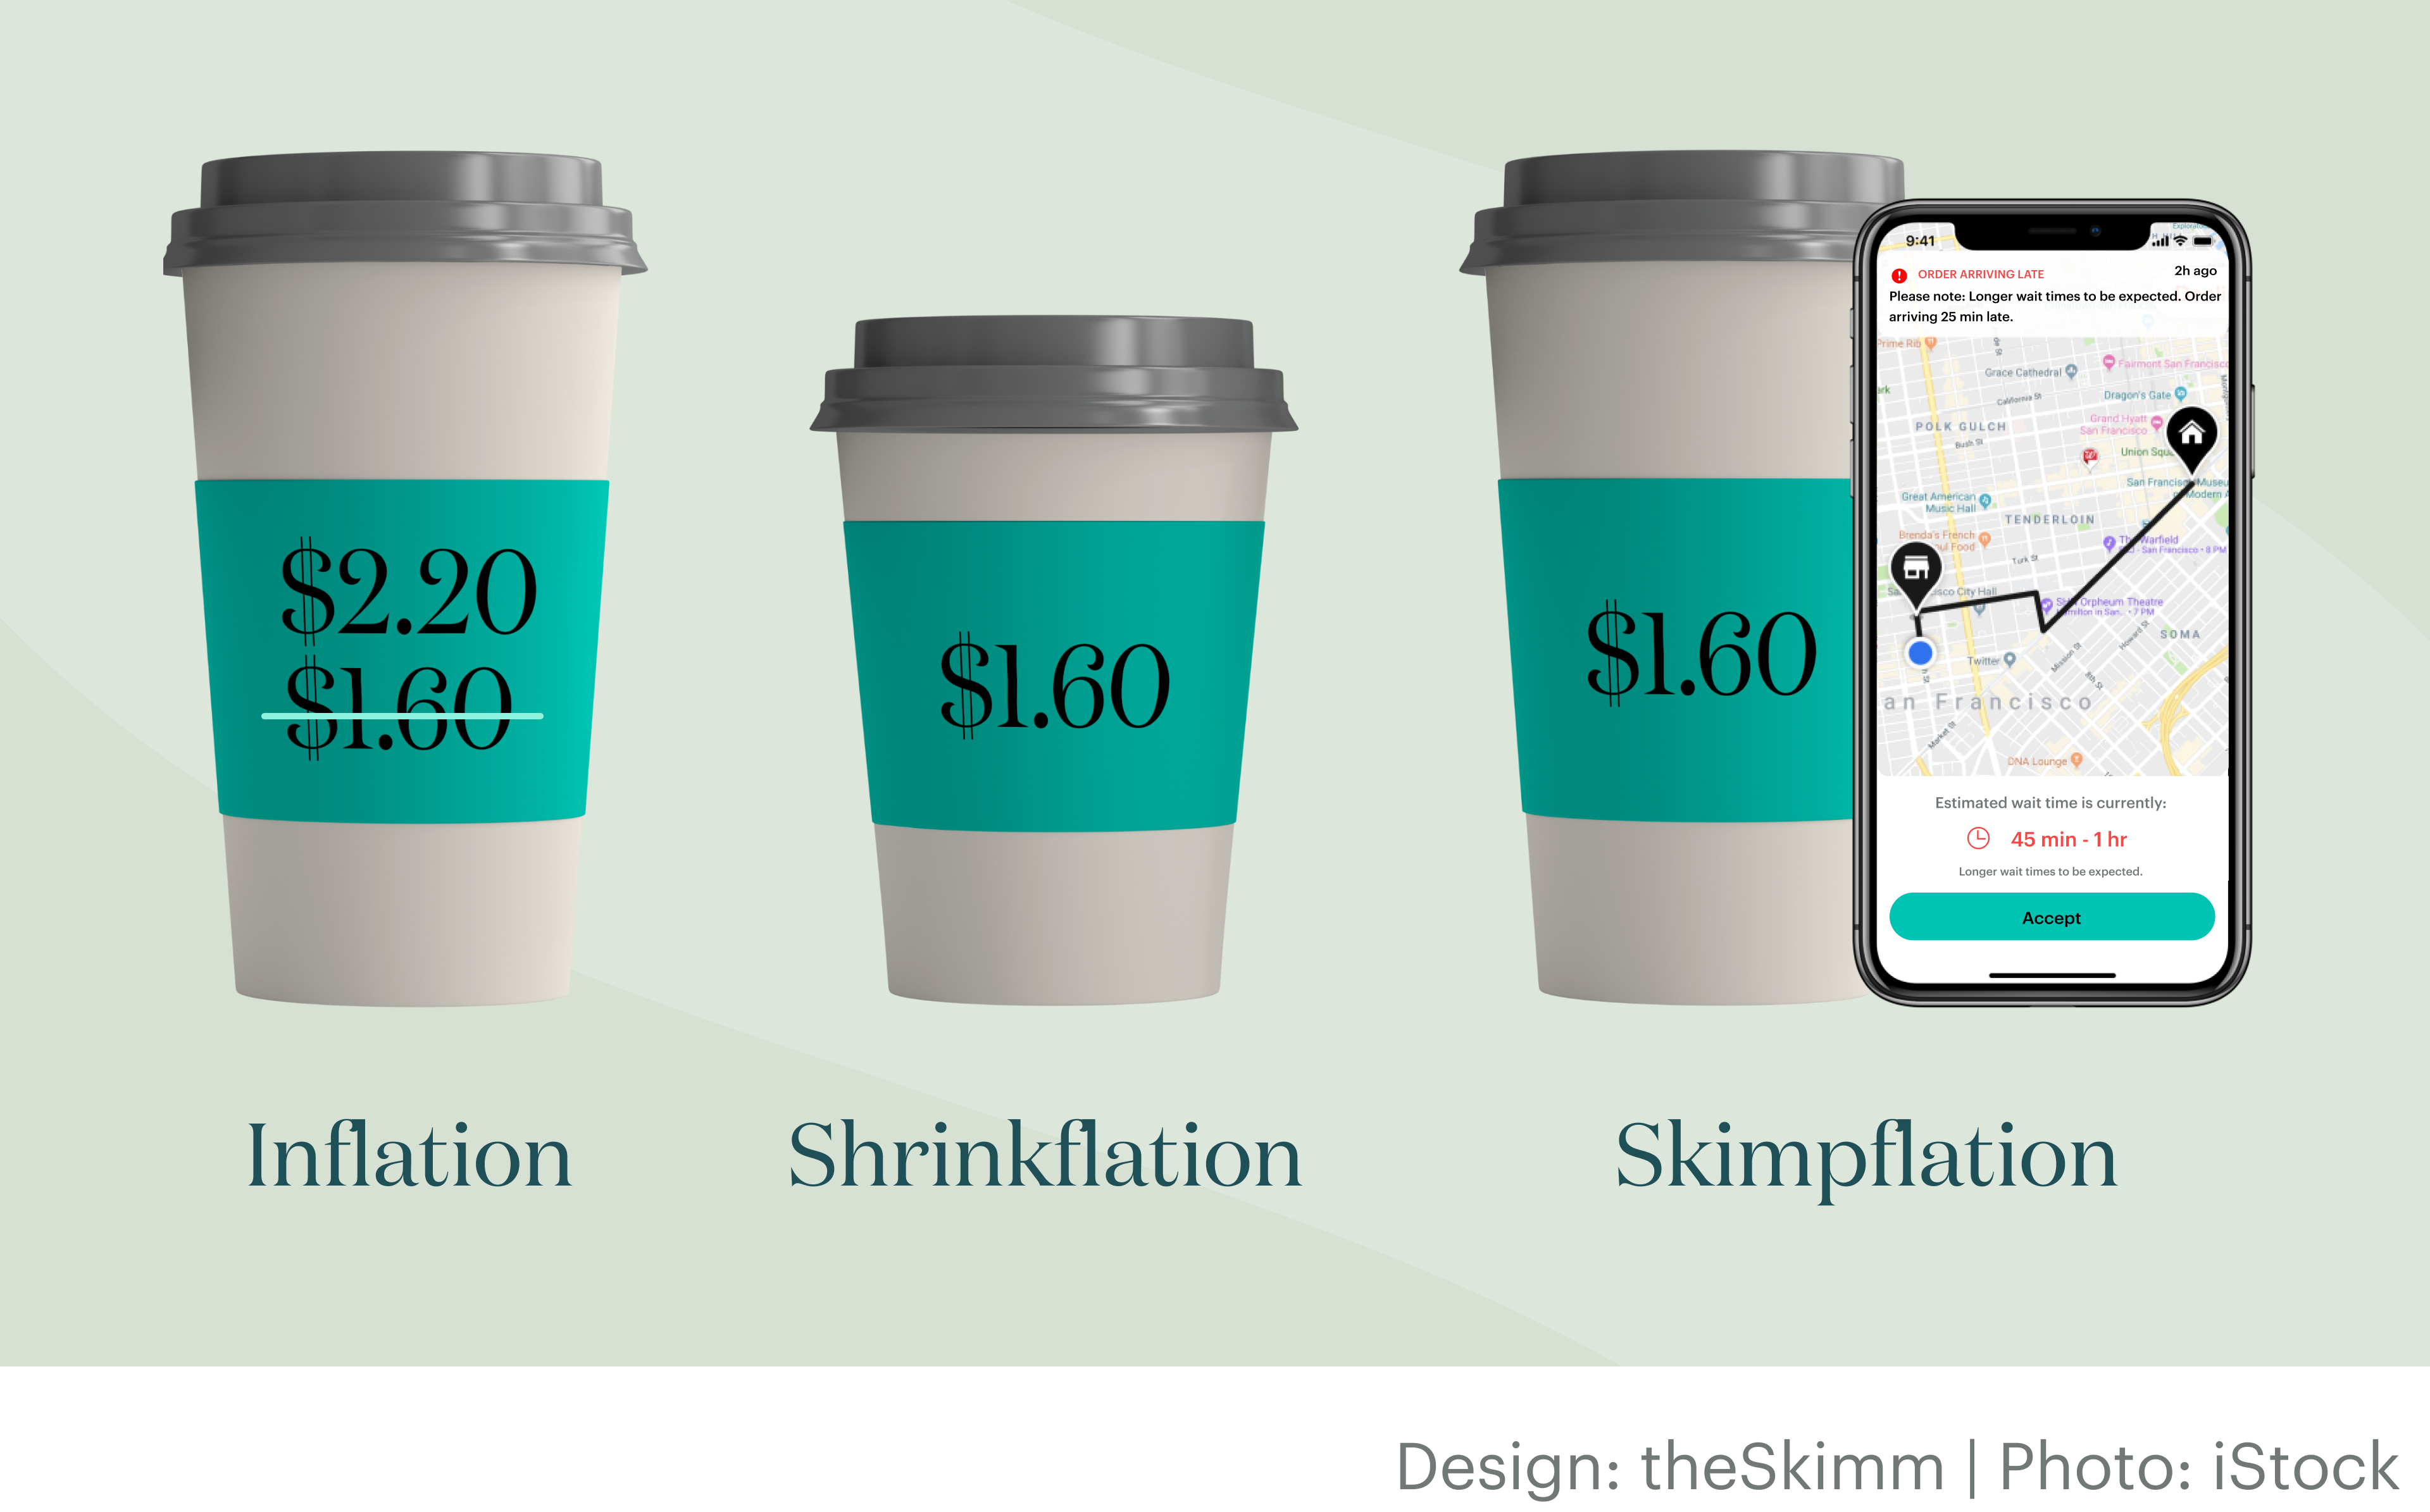 Coffee cup with higher price, smaller coffee cup with the same price, and a coffee cup with a ridesharing app and a long wait.